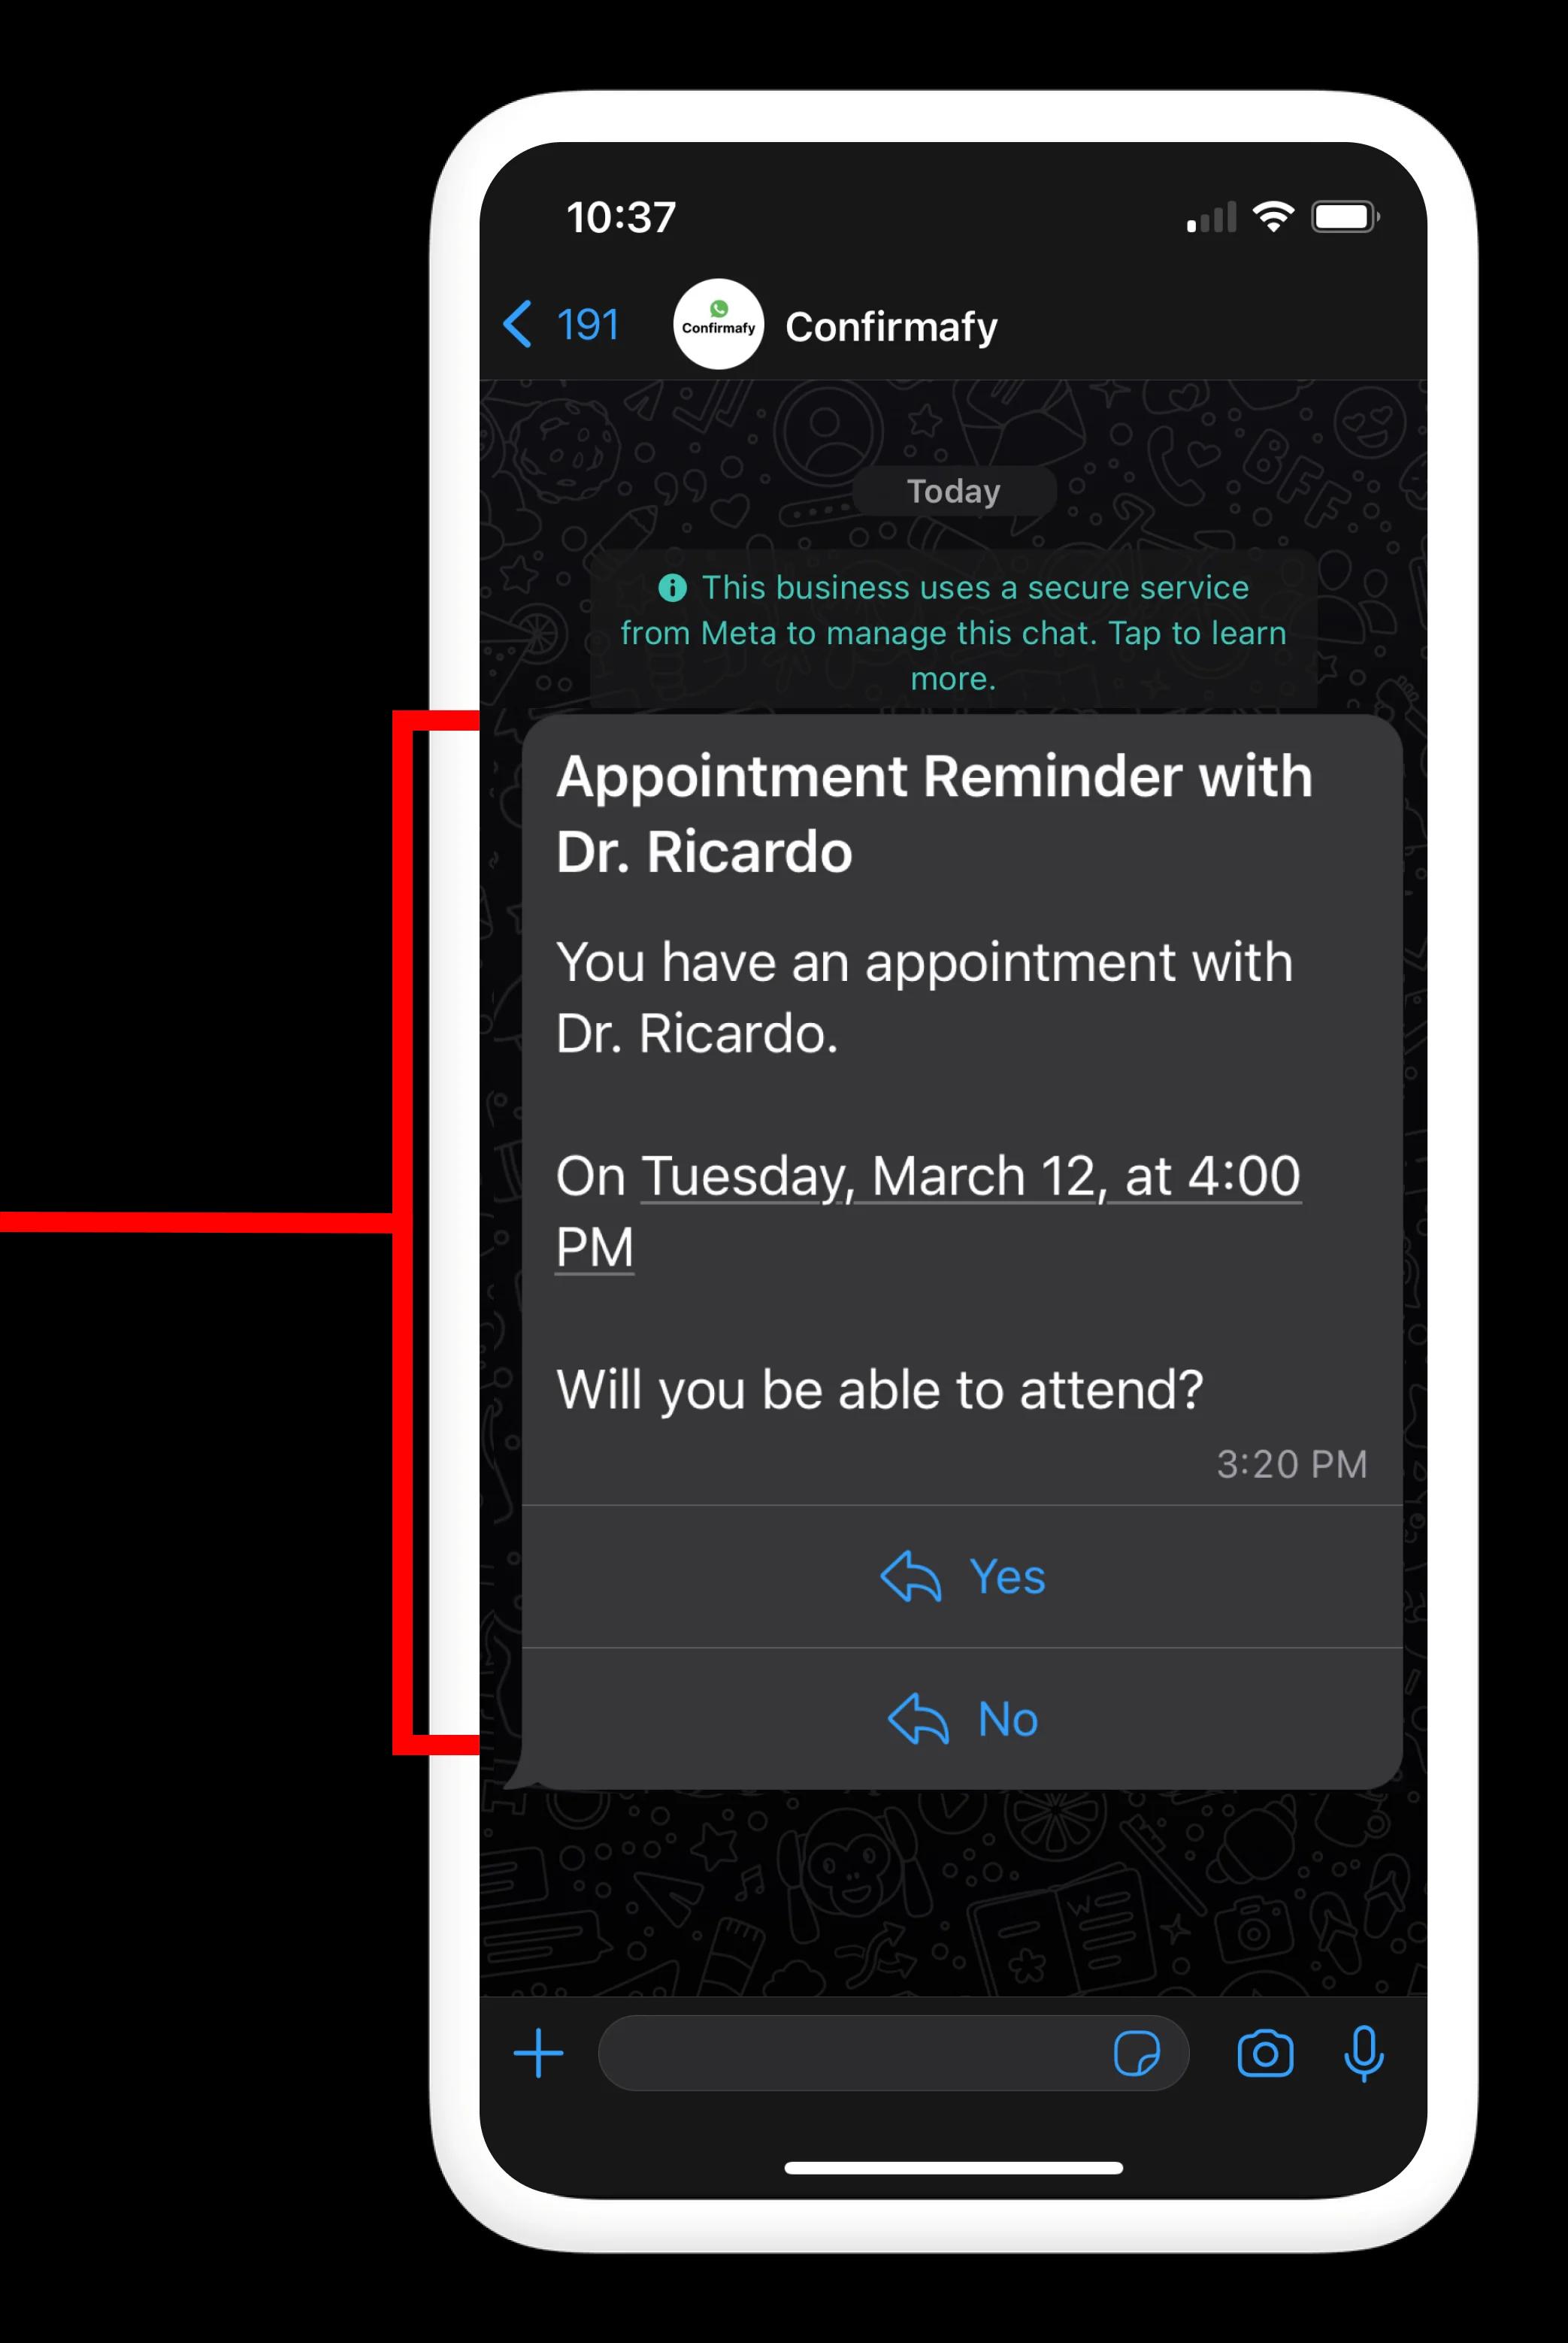 Appointment confirmation over WhatsApp